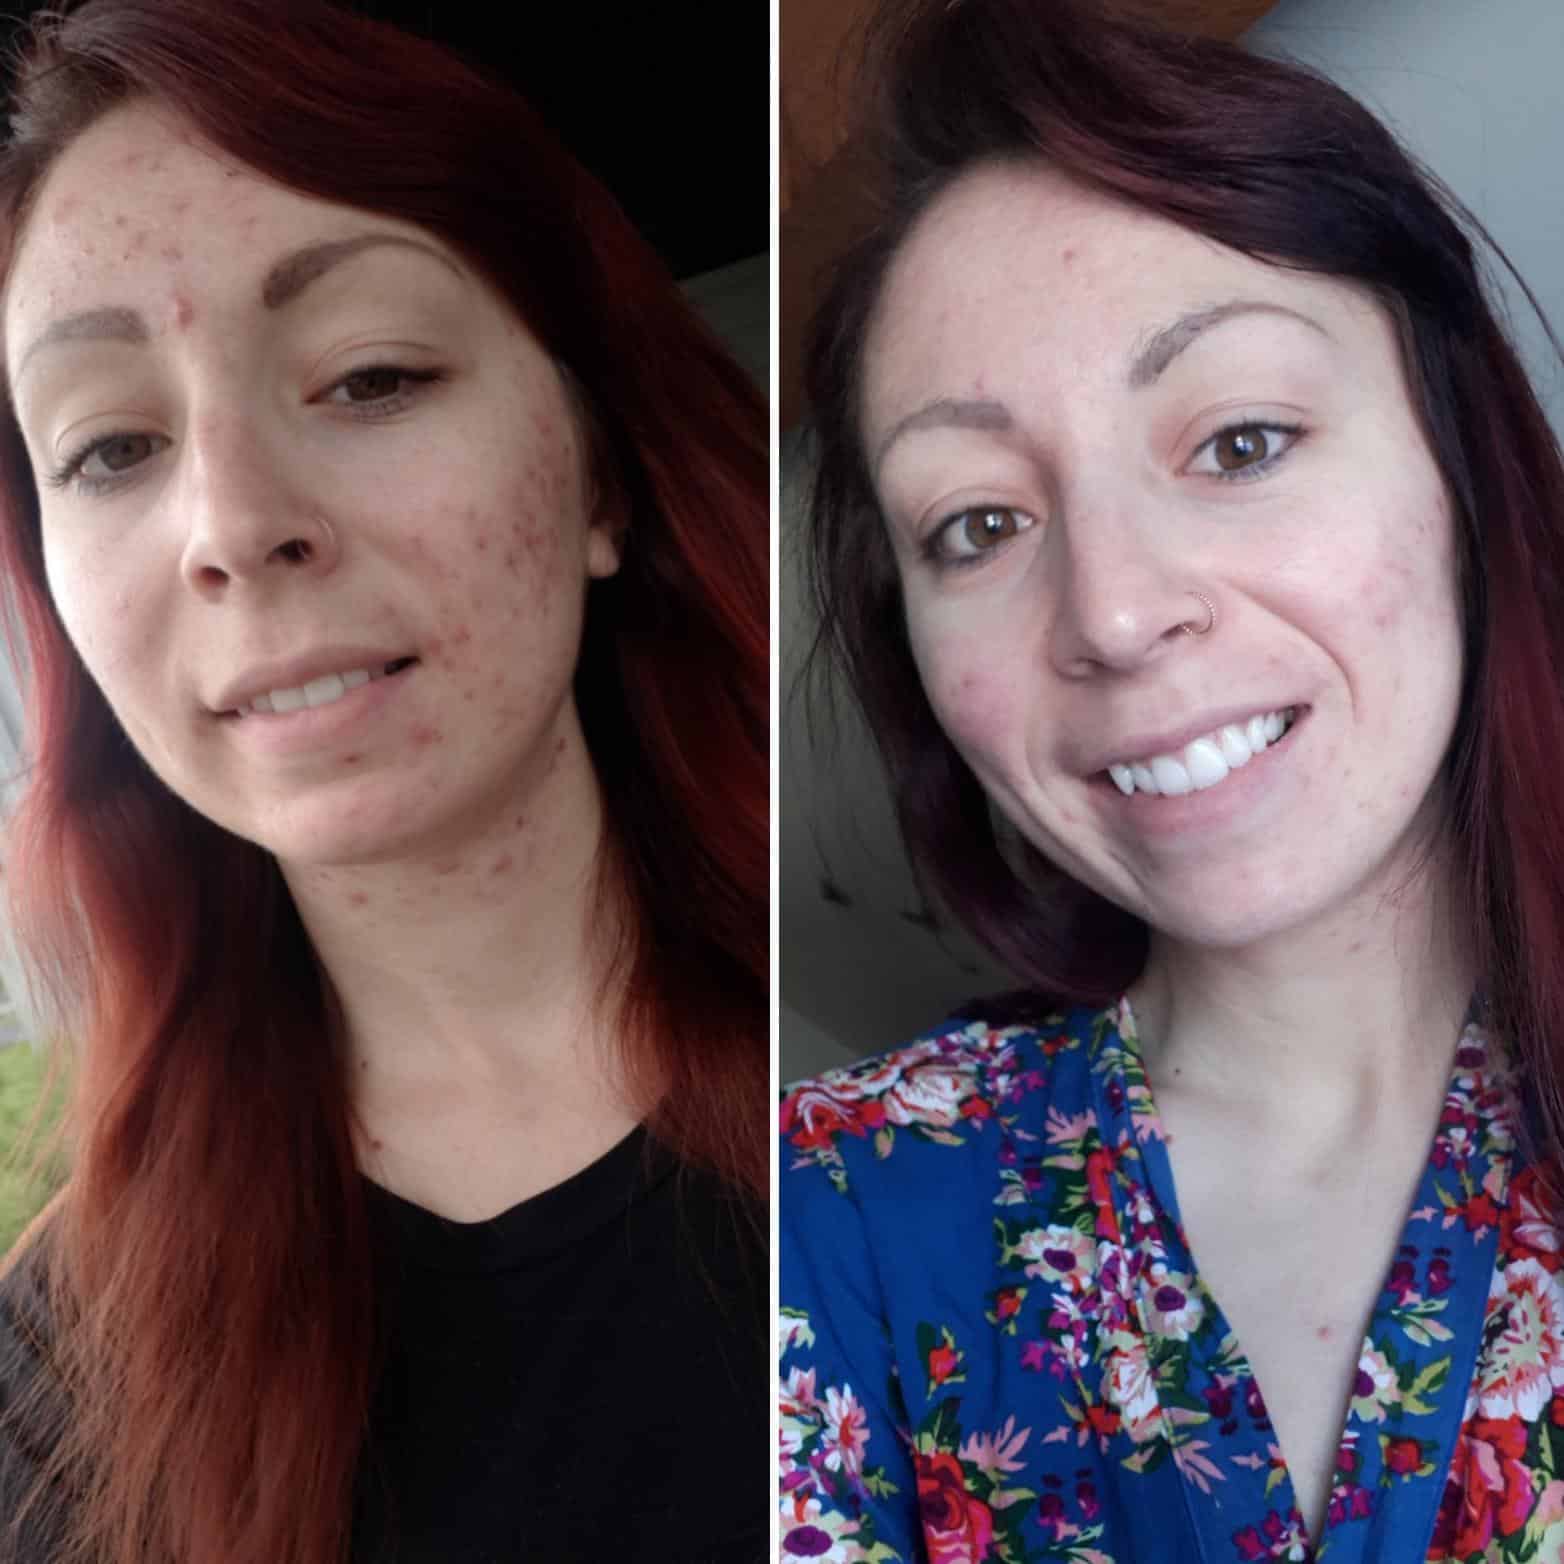 Before/after 6 months of Spiro Aldactone : acne